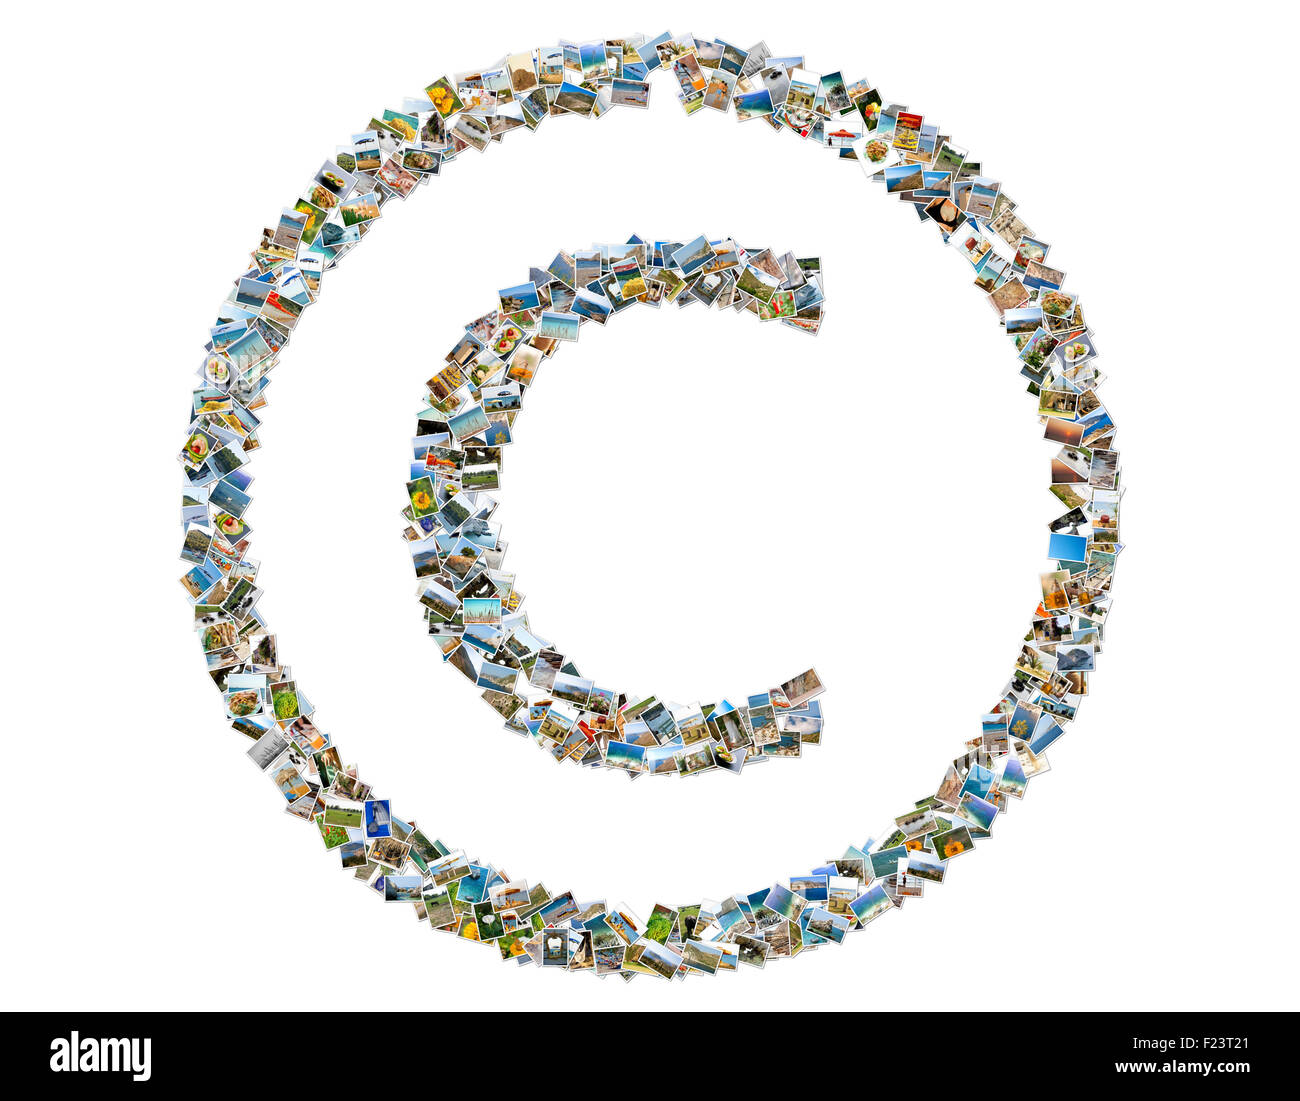 Copyright symbol, photos collage isolated on a white background Stock Photo